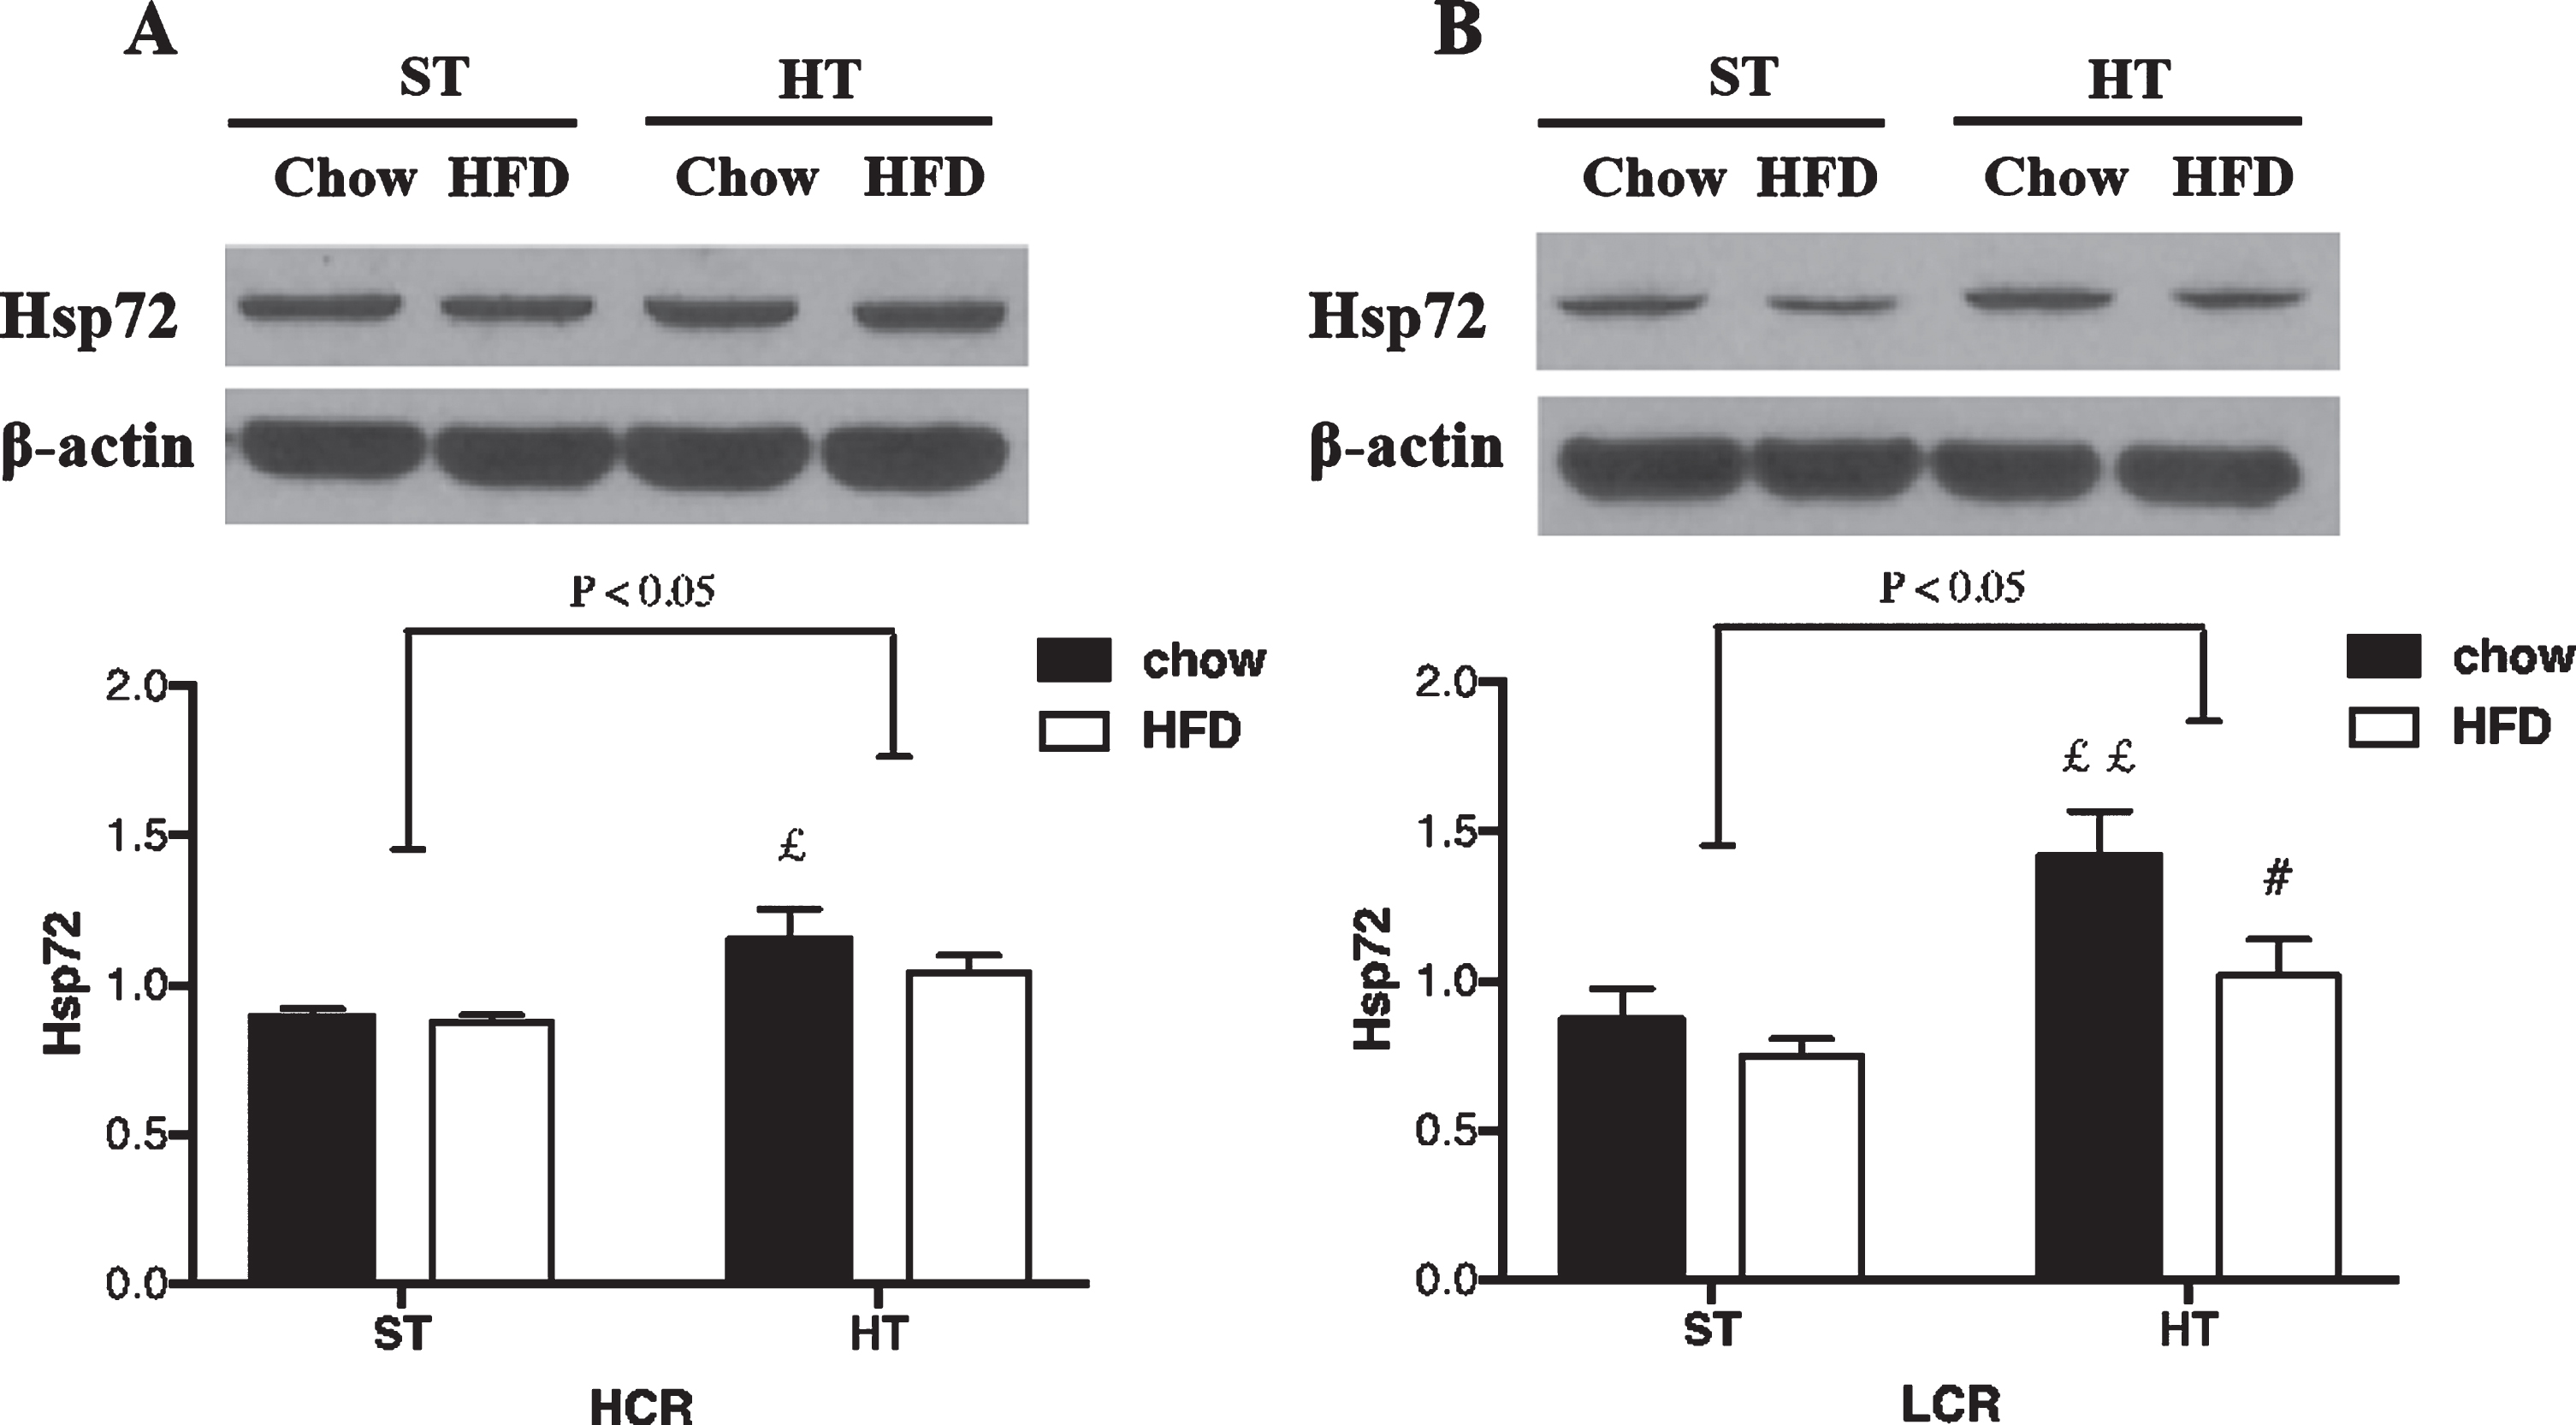 HSP72 expression in (A) HCR and (B) LCR rat hippocampus following HT. Rats were fed a chow diet or 3-day HFD and received either a single in vivo sham (37°C) or heat (41°C) treatment. Black bars represent chow diet and white bars represent a 3-day HFD. Values are expressed as mean±SE. N = 5-6 rats per group. #p < 0.05, # #p < 0.01 denotes significant difference from chow diet versus HFD within treatments (post hoc). £p < 0.05, ££p < 0.01 denotes significant difference from HT versus sham treatment within diets (post hoc).